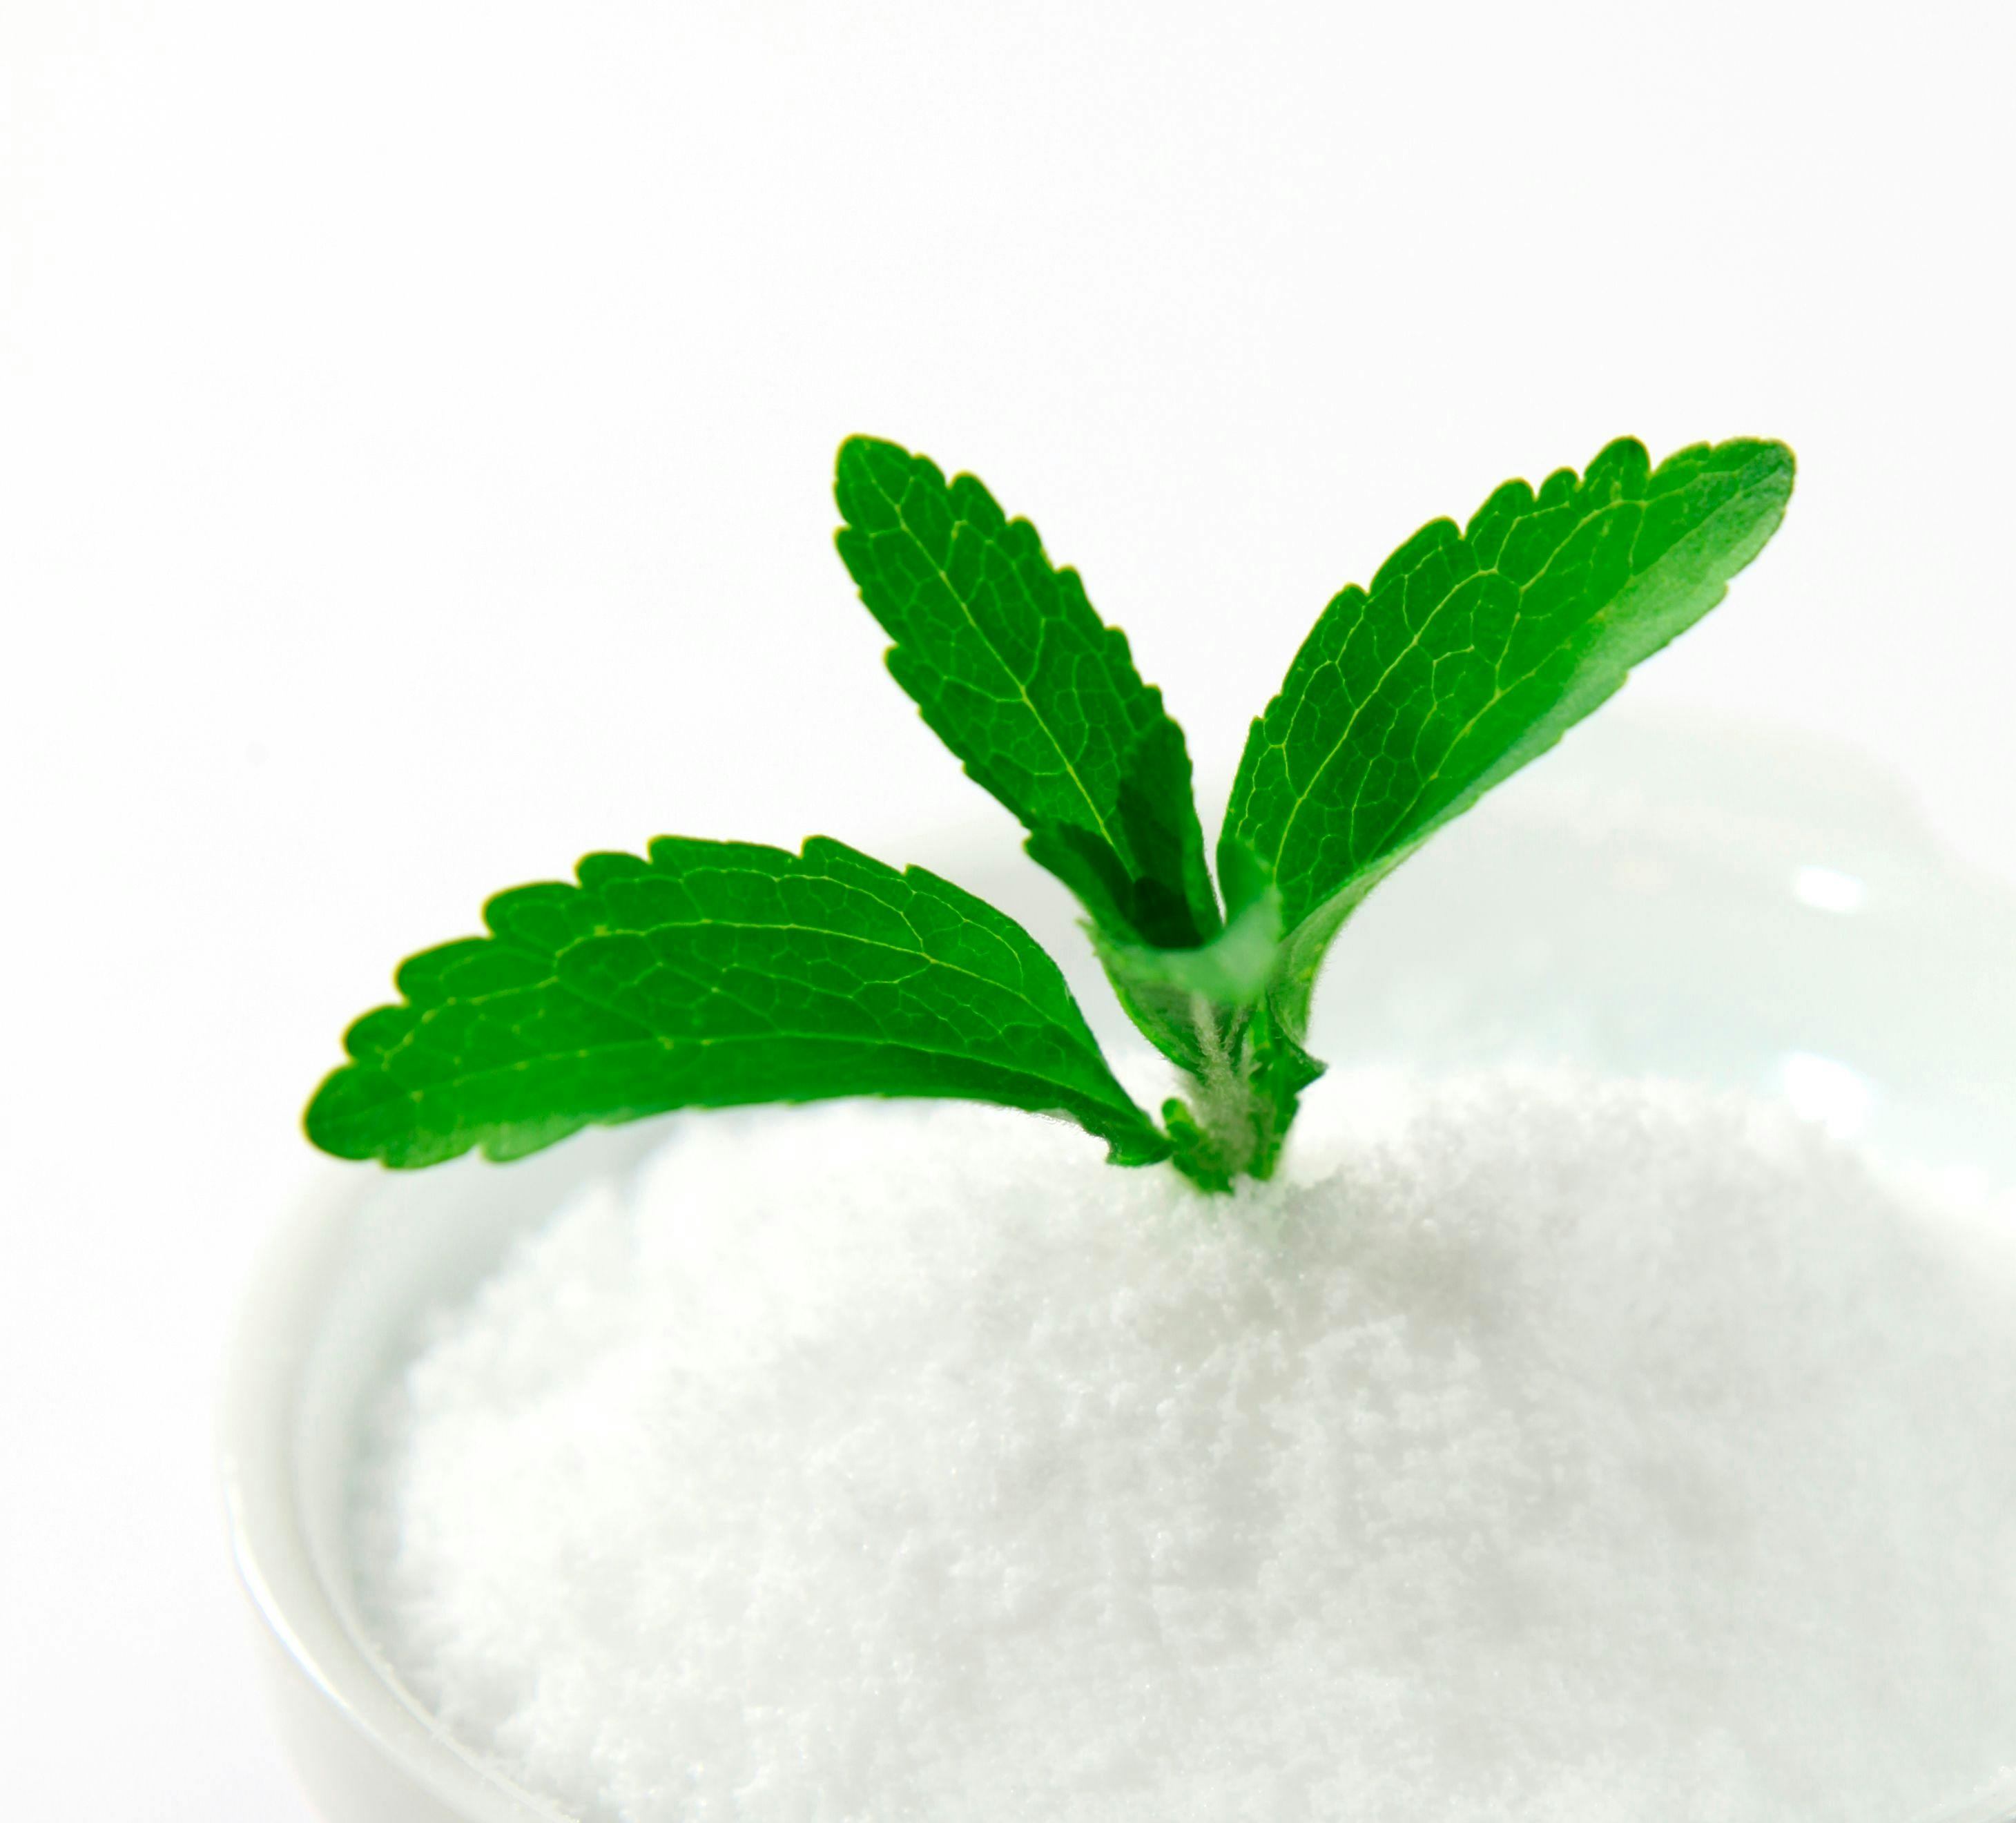 Stevia Use in Food, Beverage Launches Up More than 10% in 2017